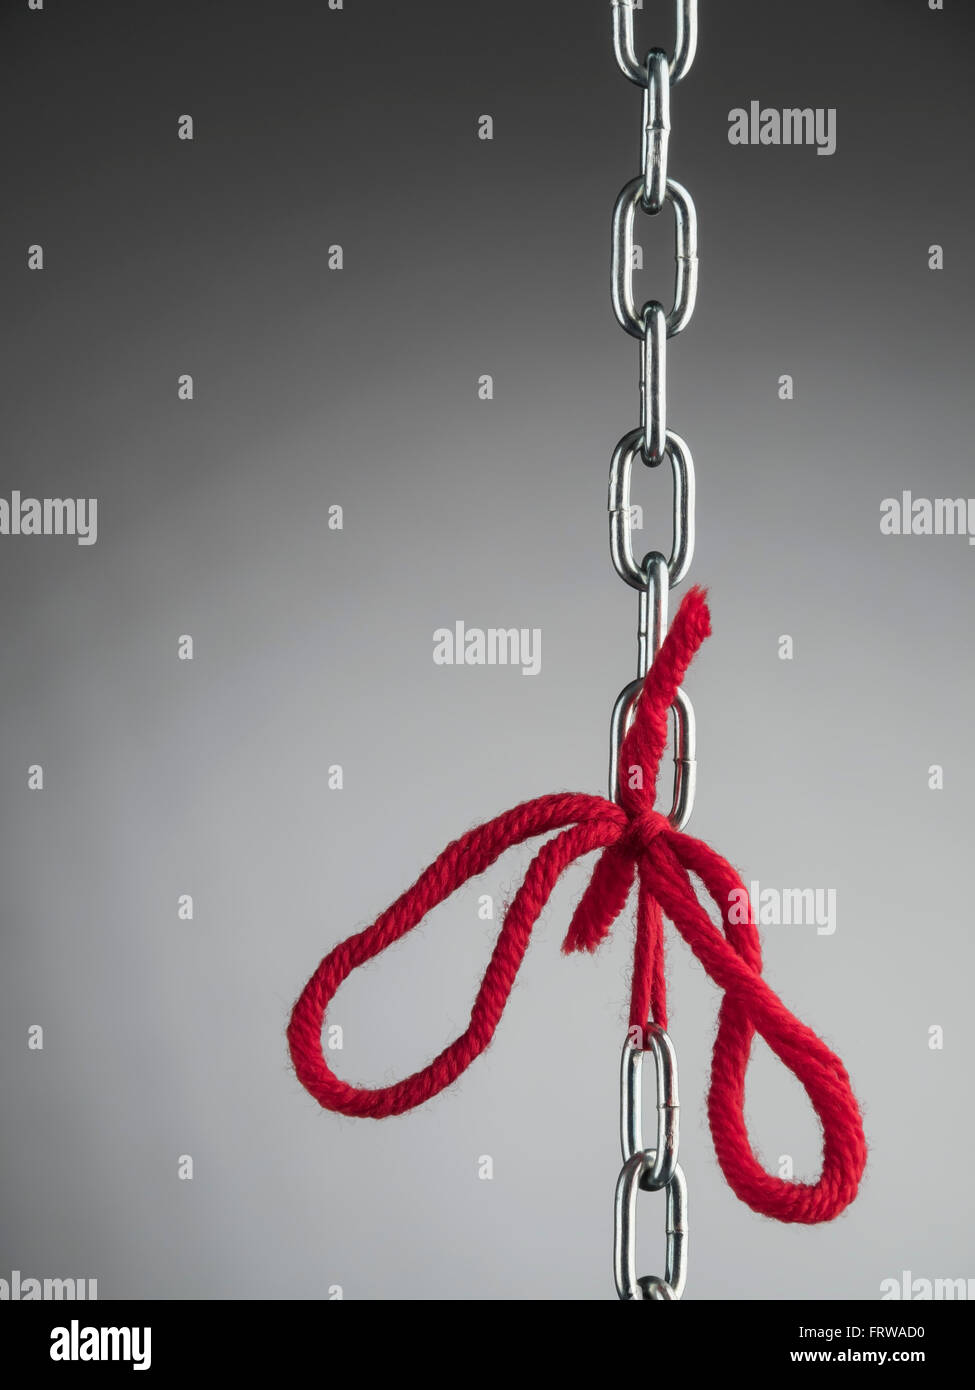 Chain and red ribbon, bonding Stock Photo